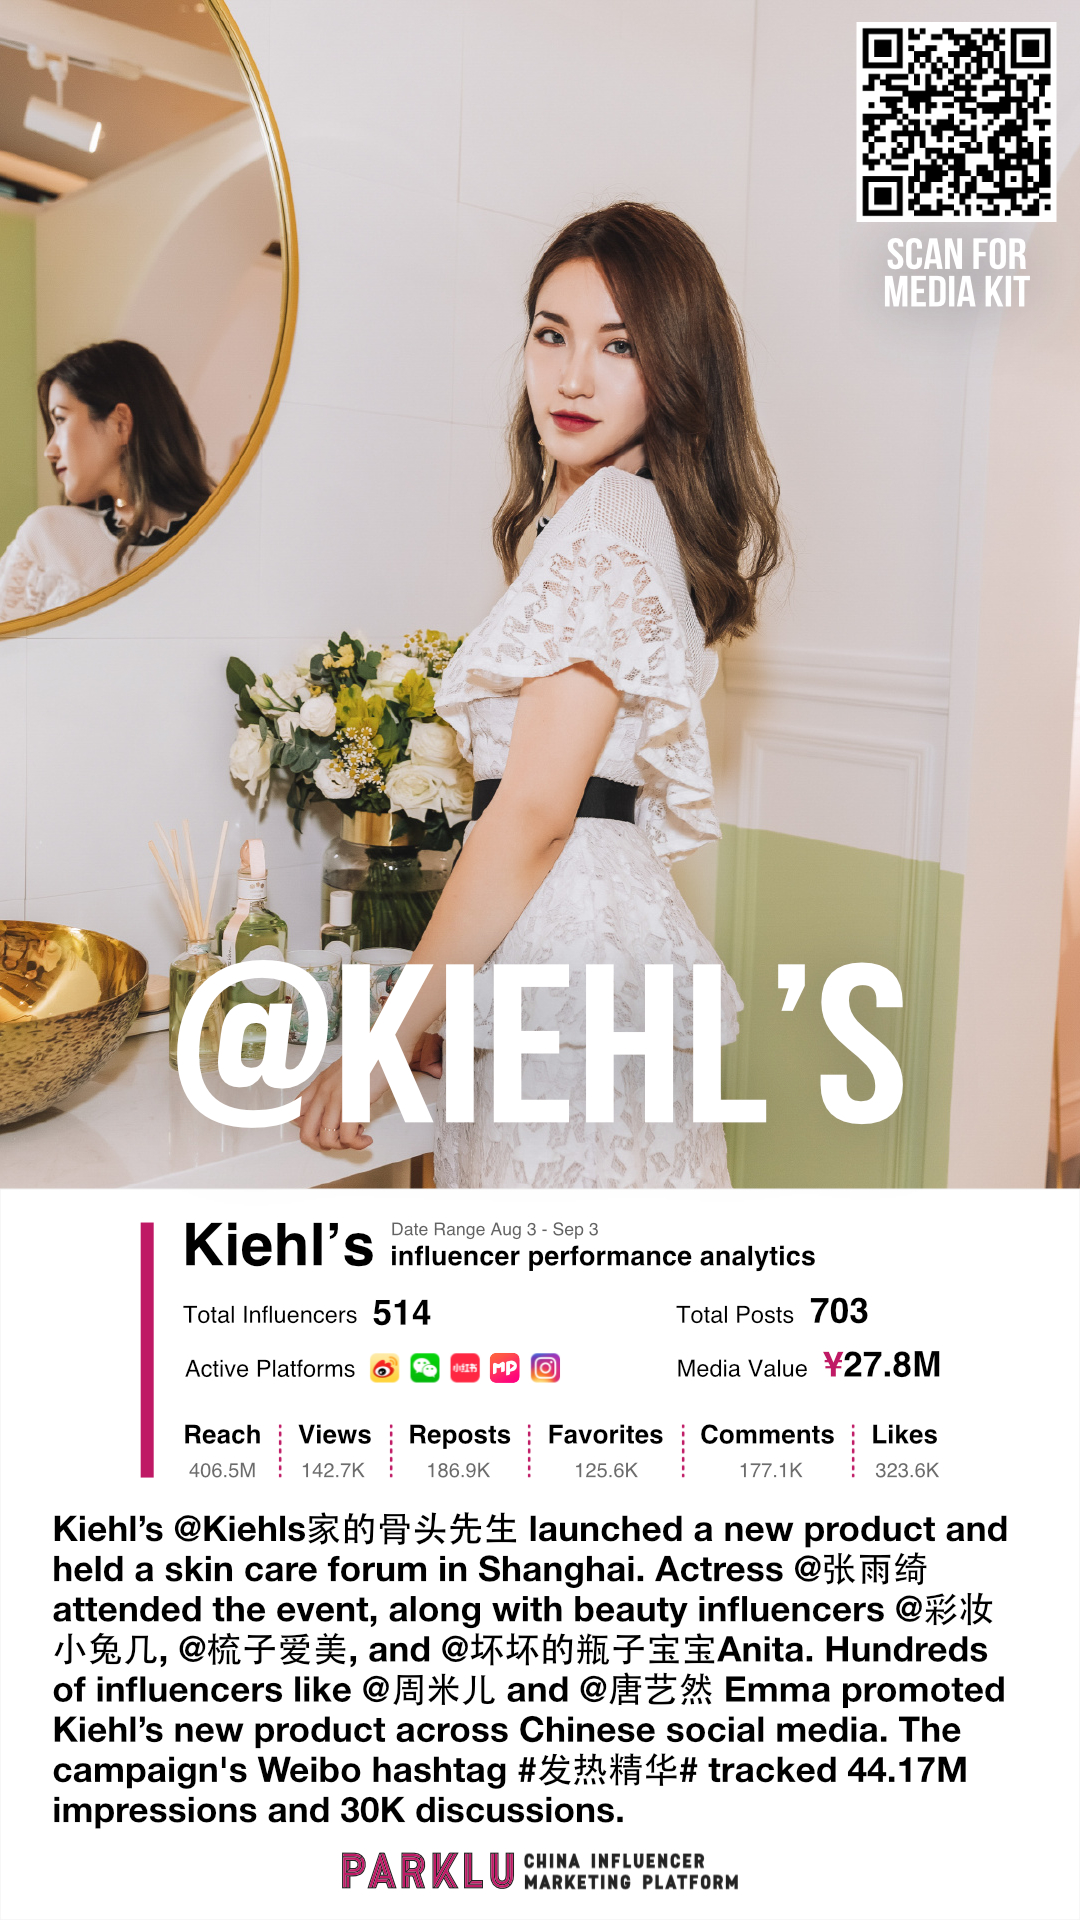 Kiehl’s Product Launch Event in Shanghai with Beauty Influencers